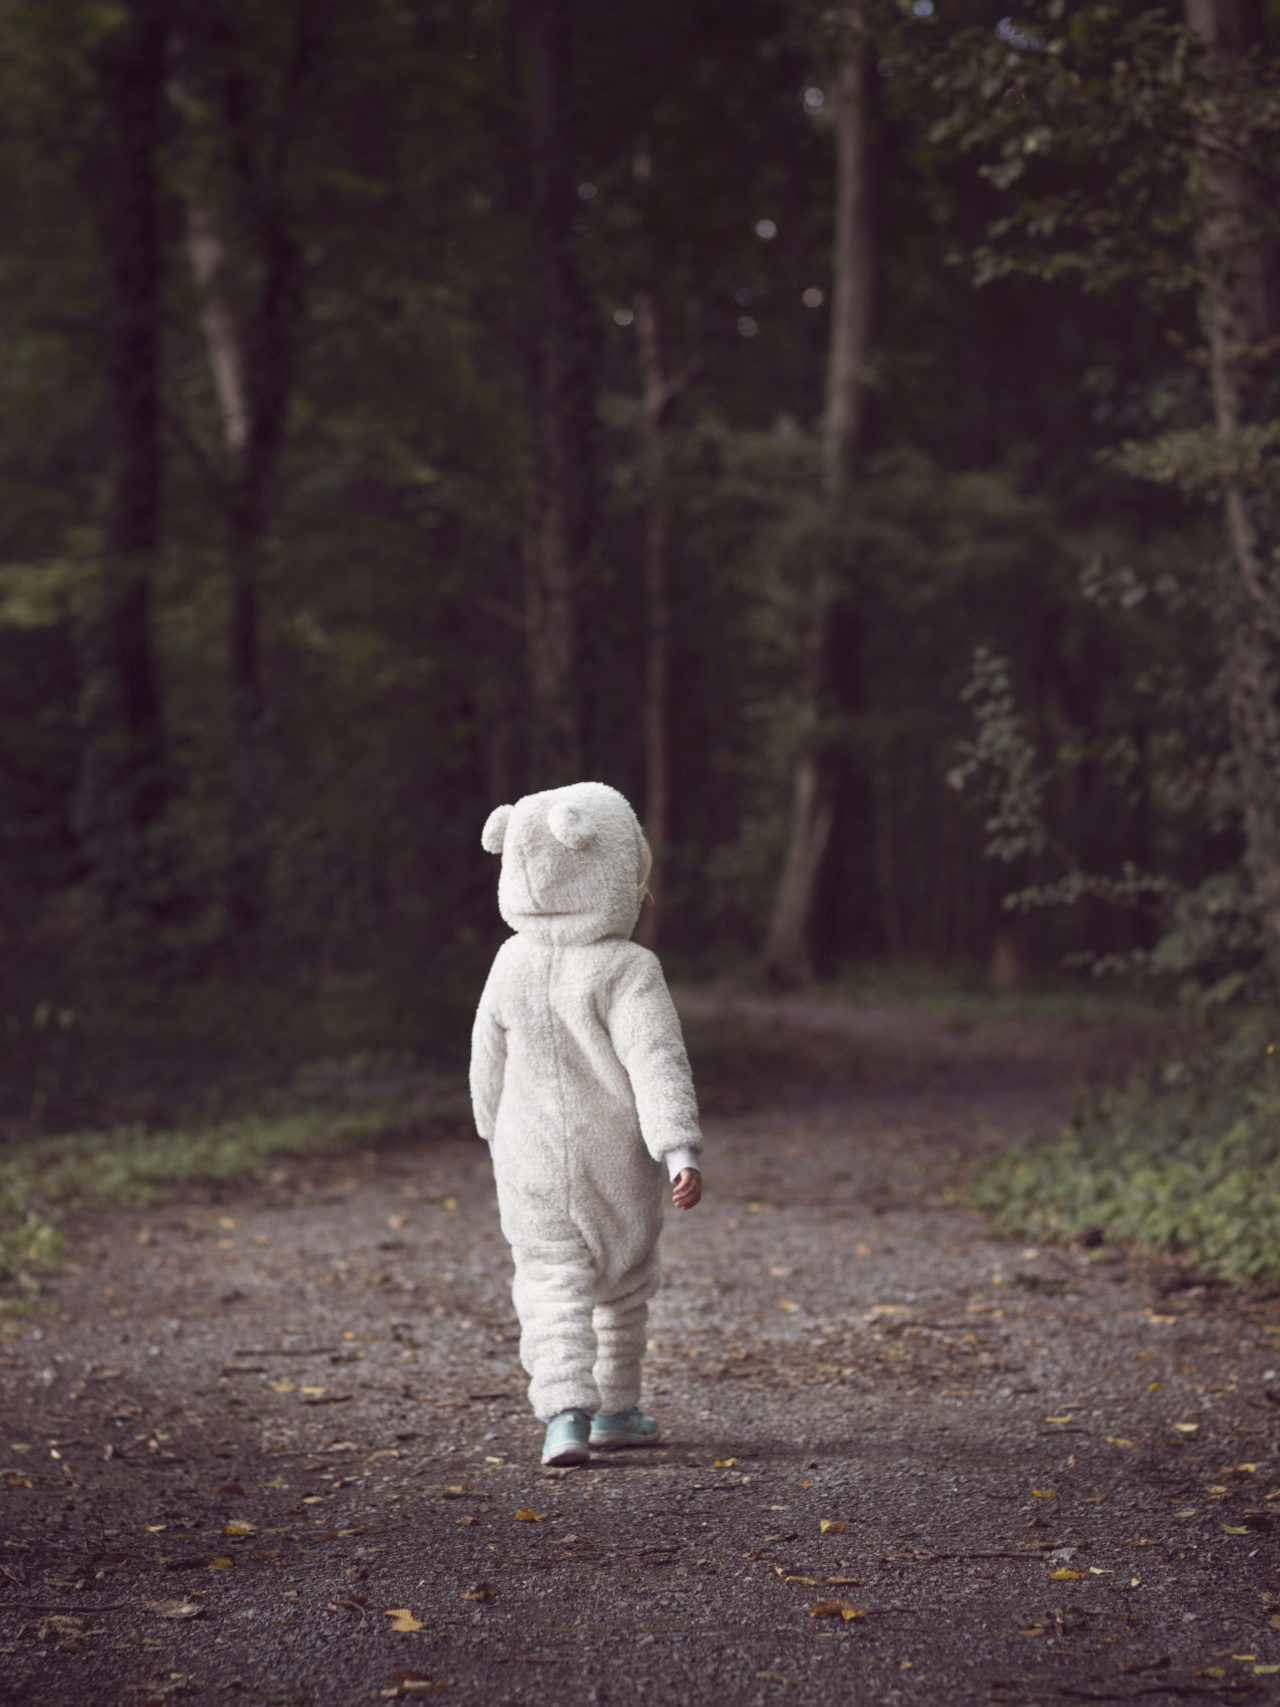 Small child wearing white bear suit, walking along a tree-lined forest path